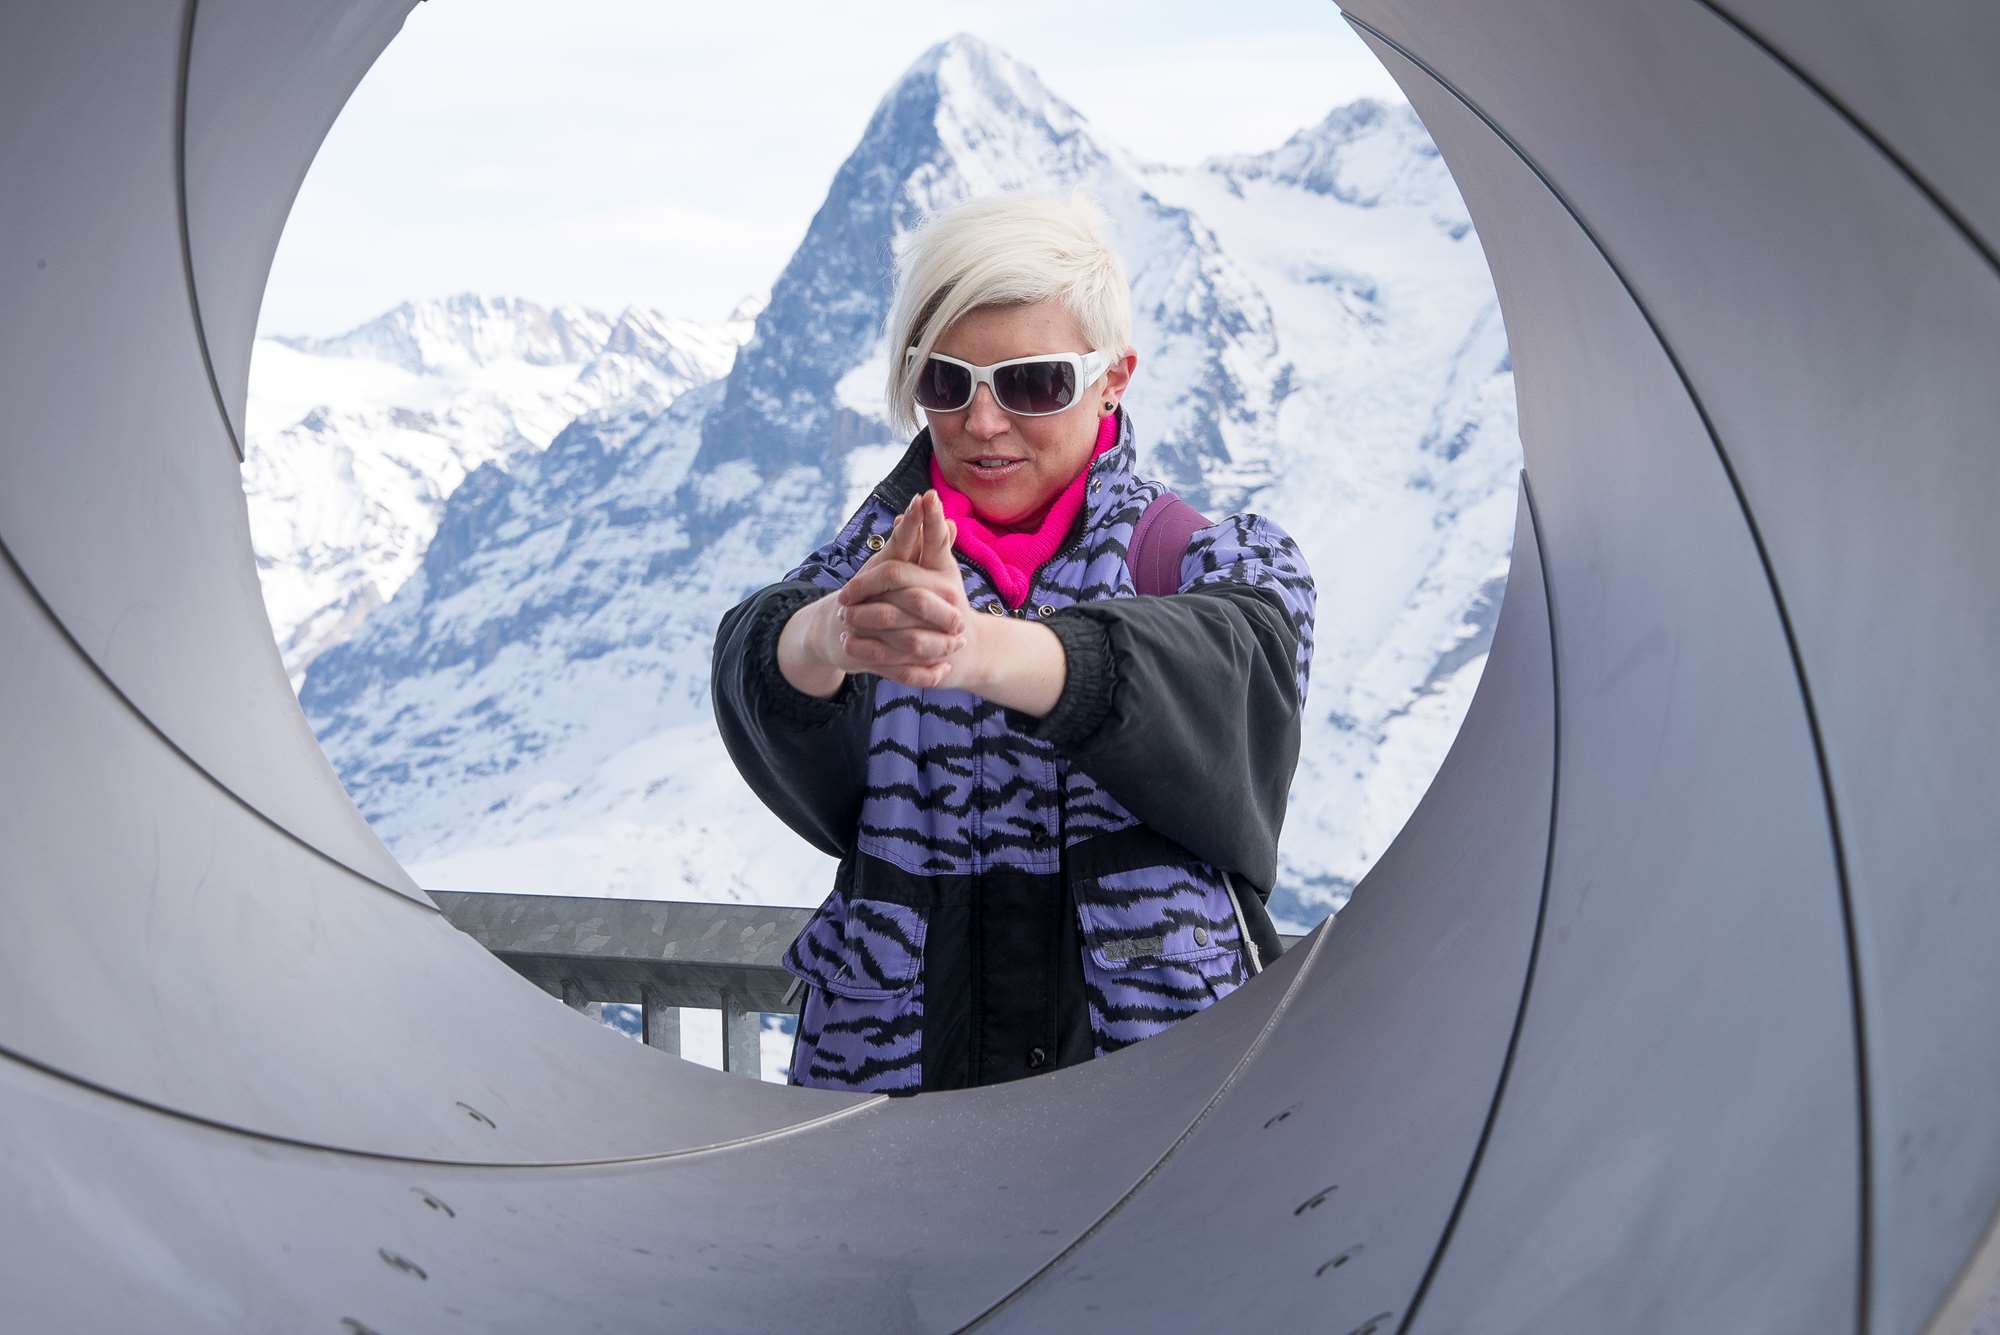 Playing James Bond on the Schilthorn